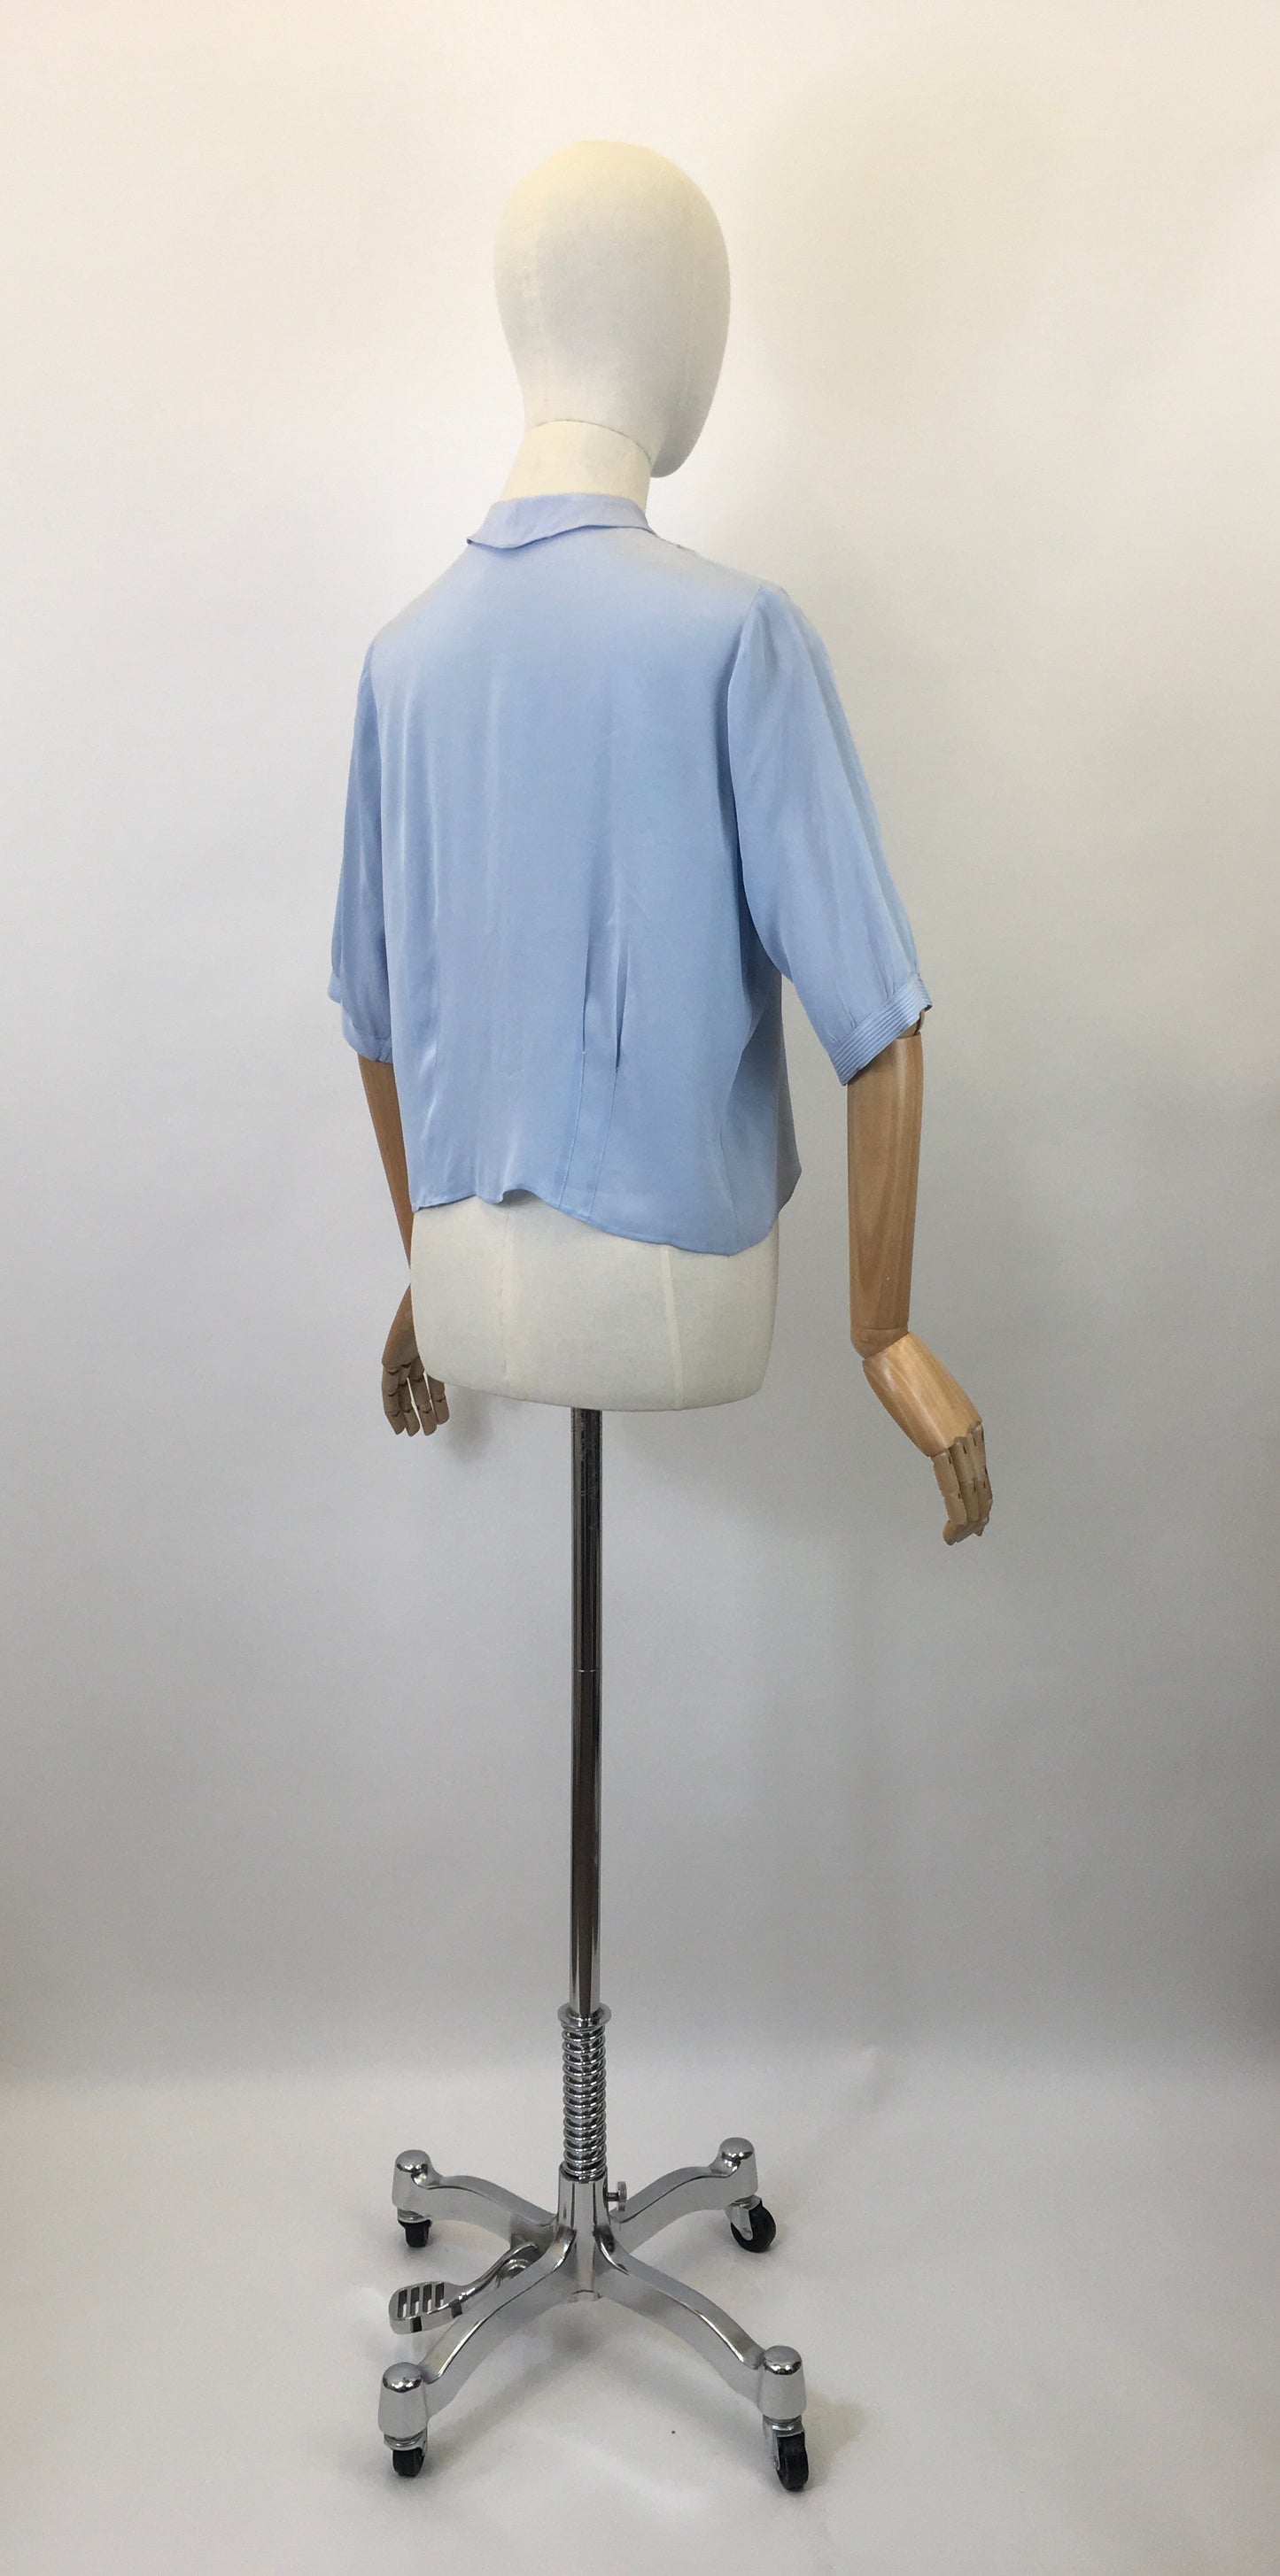 Original 1940’s Darling Sheer Blouse in Powder Blue - With Embroidery and Pintuck Details